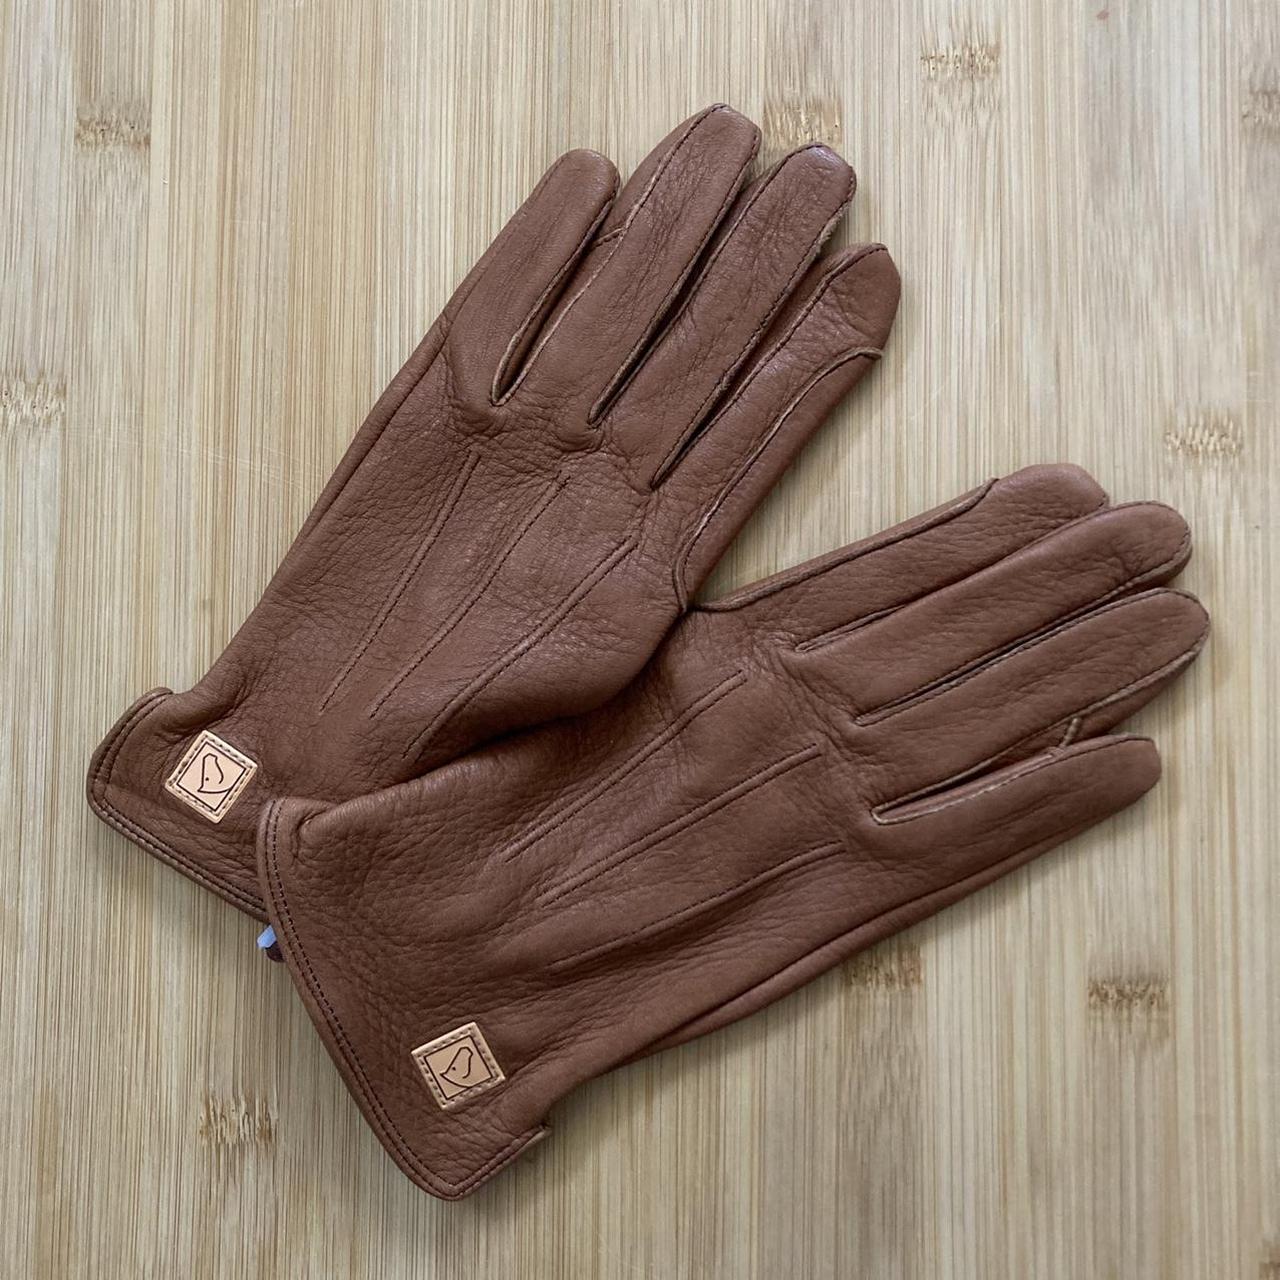 Product Image 1 - SSG riding gloves. Style 2300.